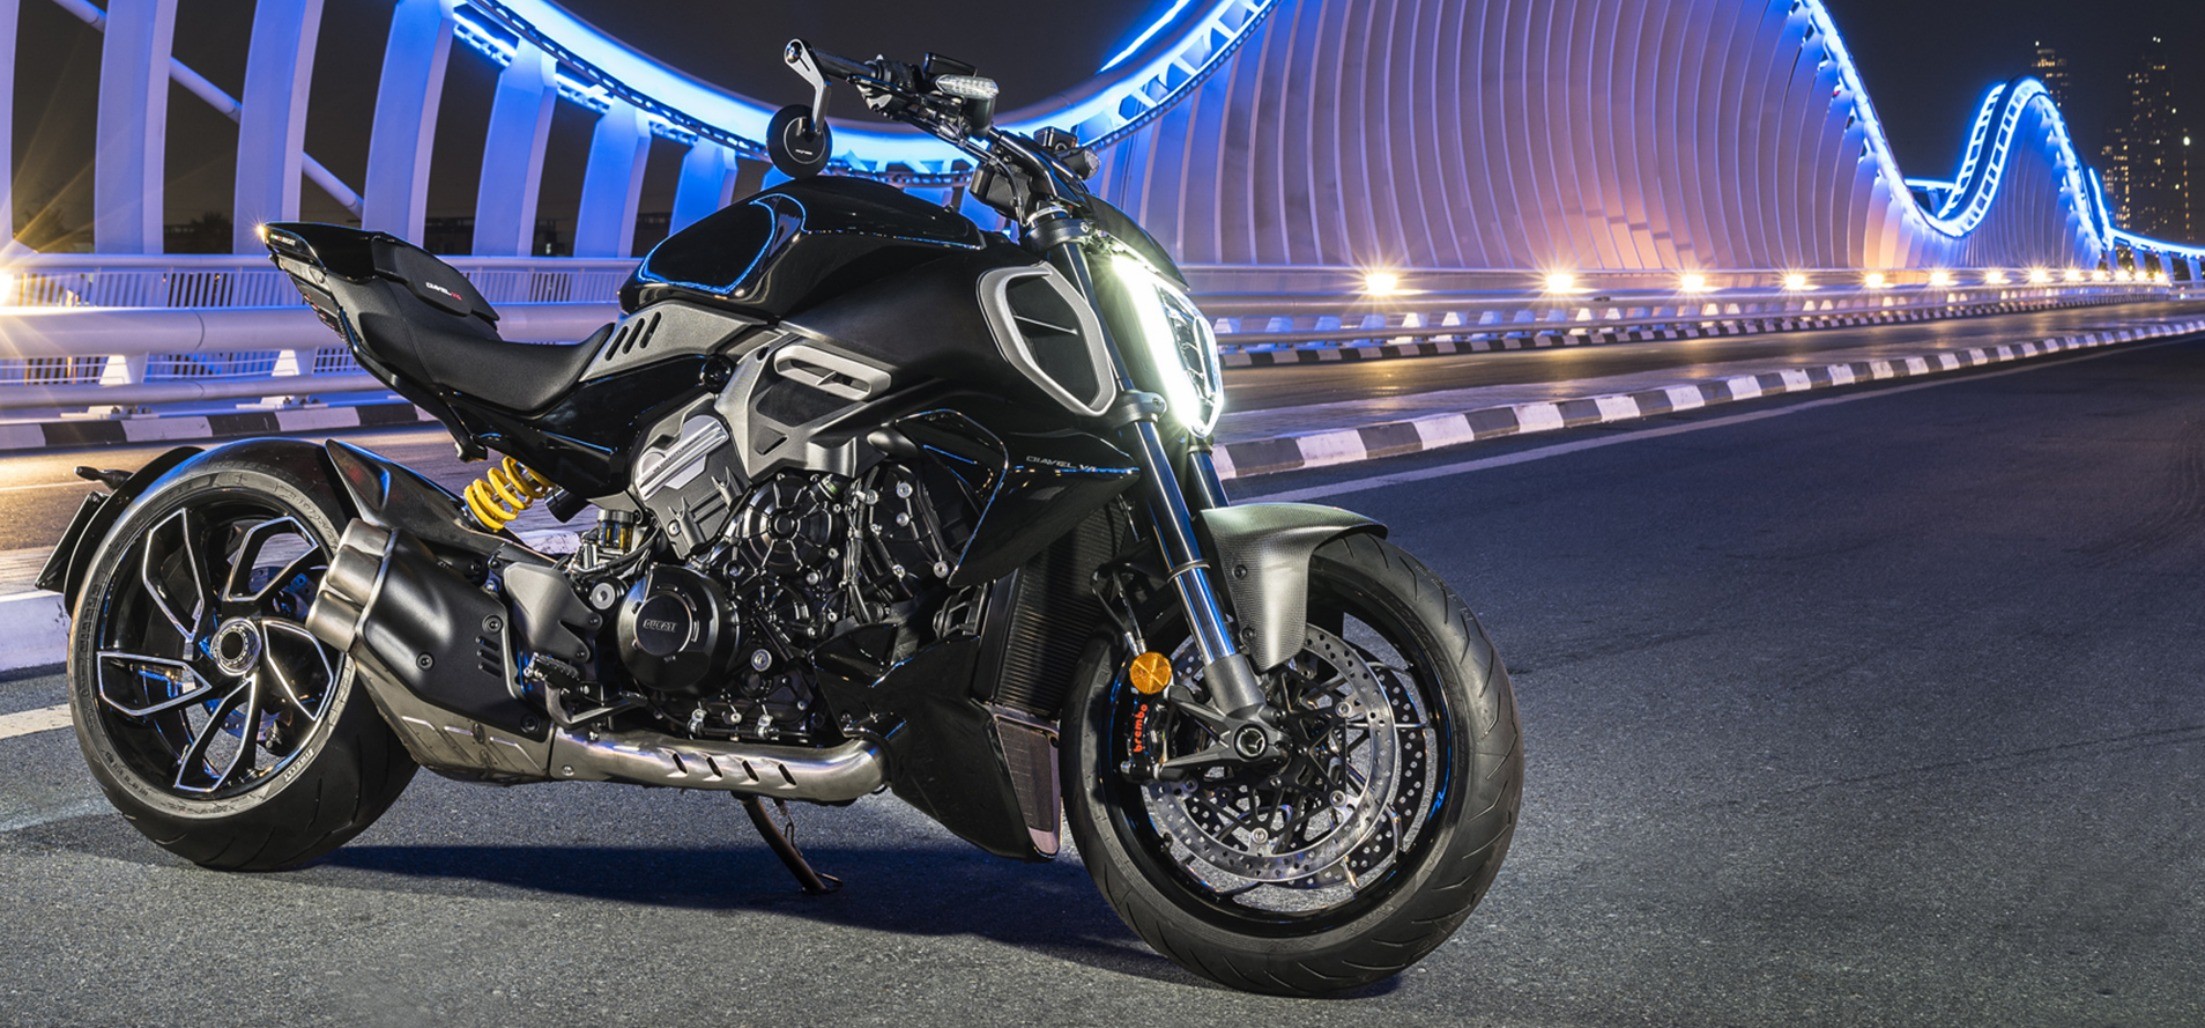 Diavel V4, Ducati styling wins in the world